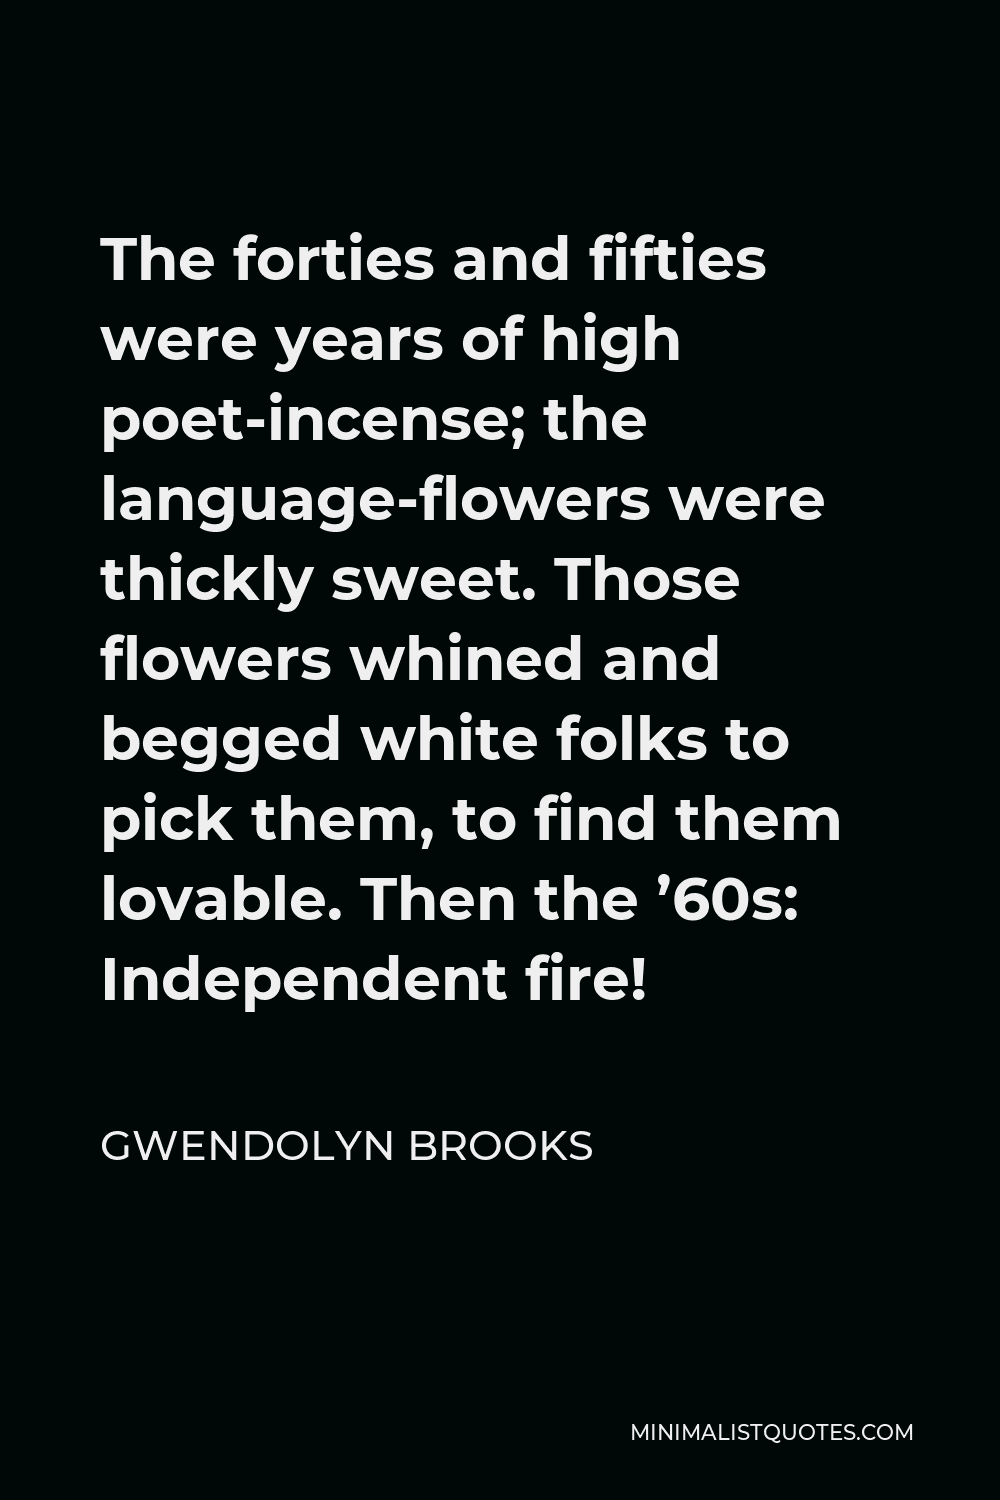 Gwendolyn Brooks Quote - The forties and fifties were years of high poet-incense; the language-flowers were thickly sweet. Those flowers whined and begged white folks to pick them, to find them lovable. Then the ’60s: Independent fire!